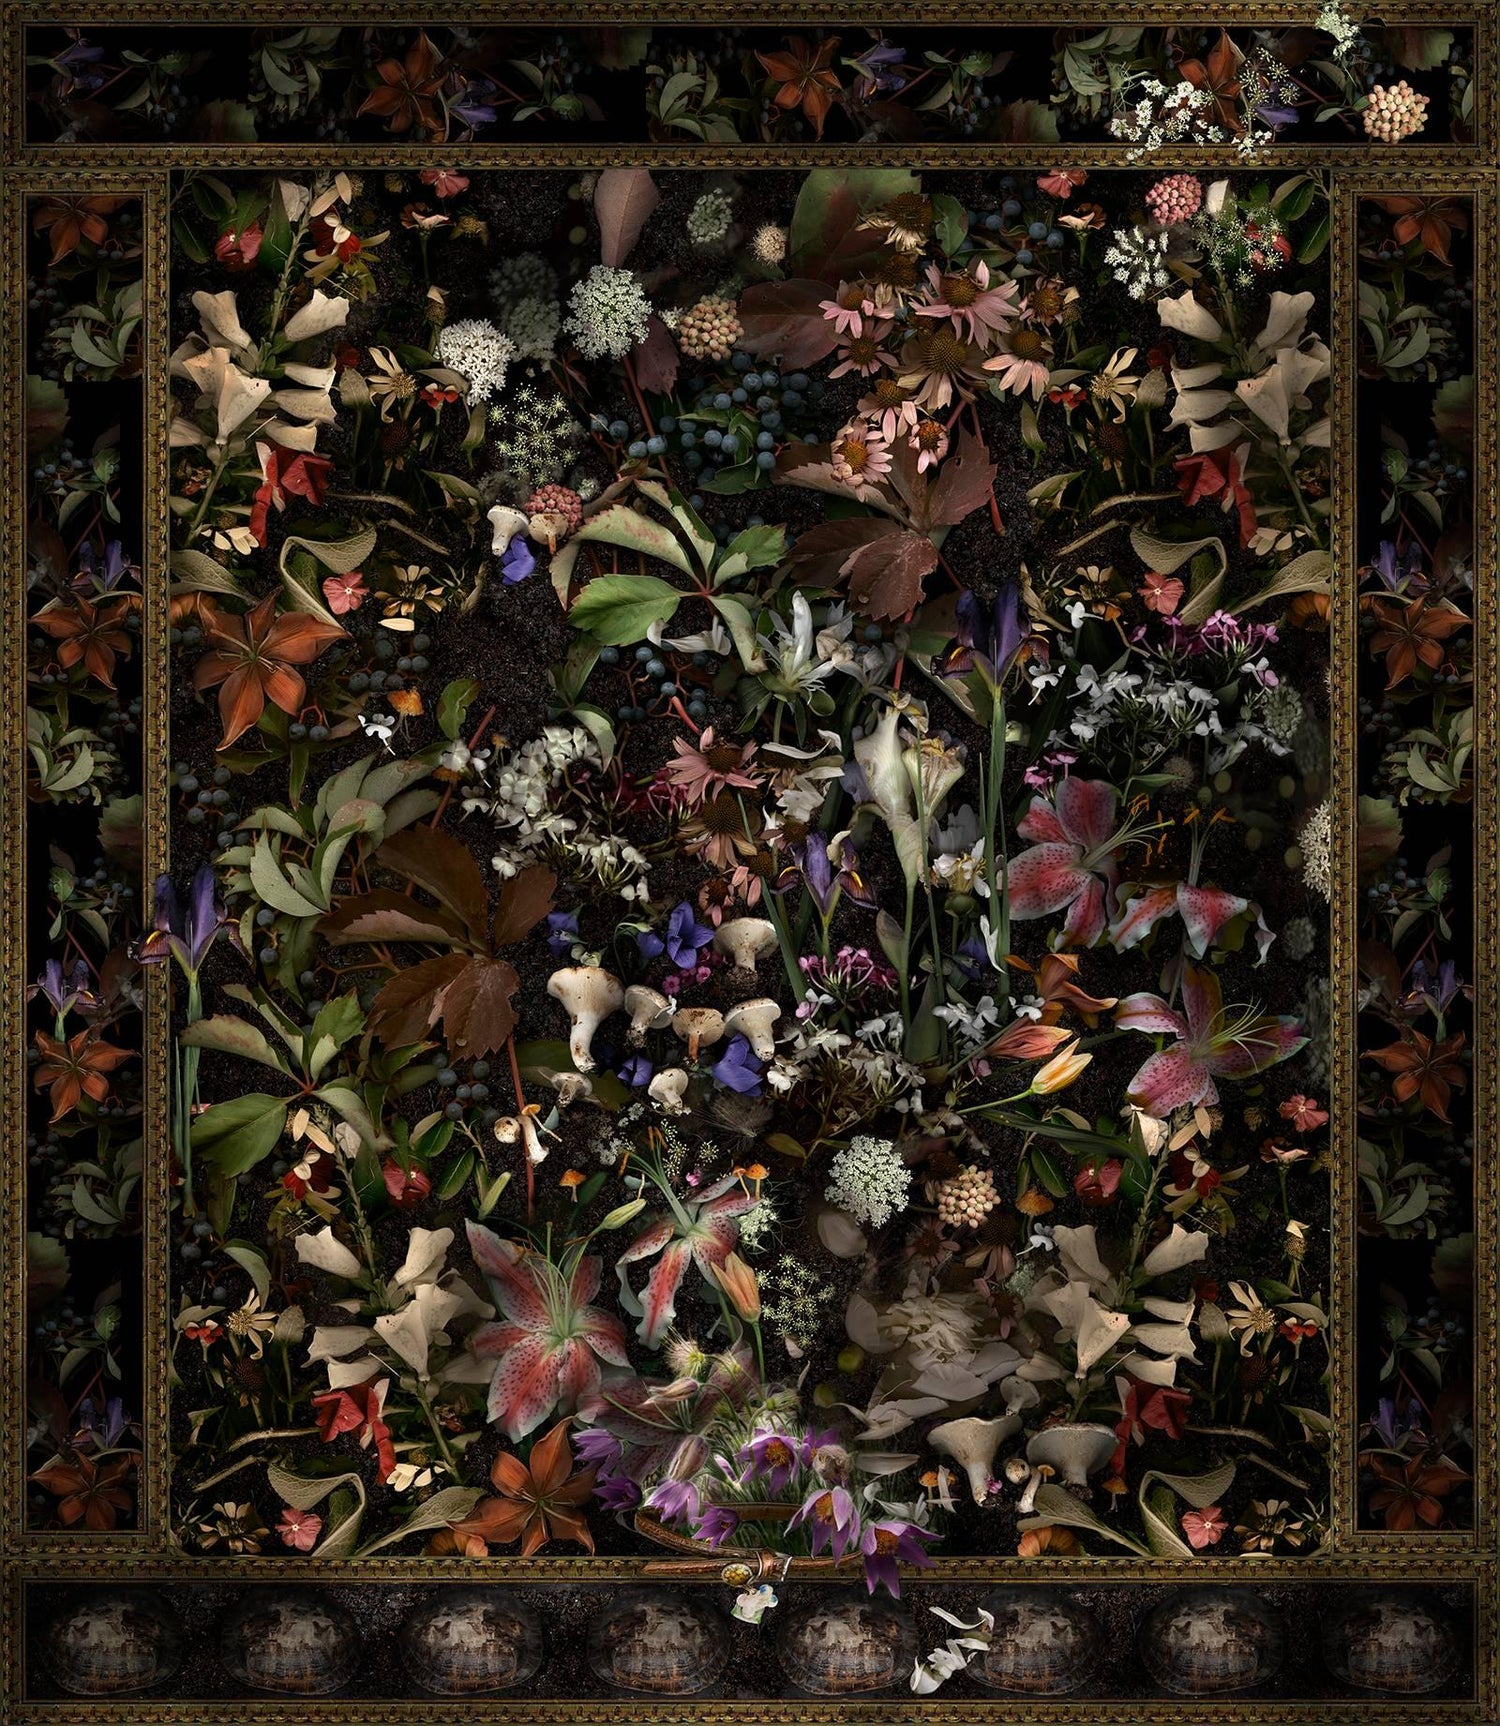 Lisa A. Frank - For Scout A, Very Good Dog: Modern Baroque Style Floral  Still Life Digital Print For Sale at 1stDibs